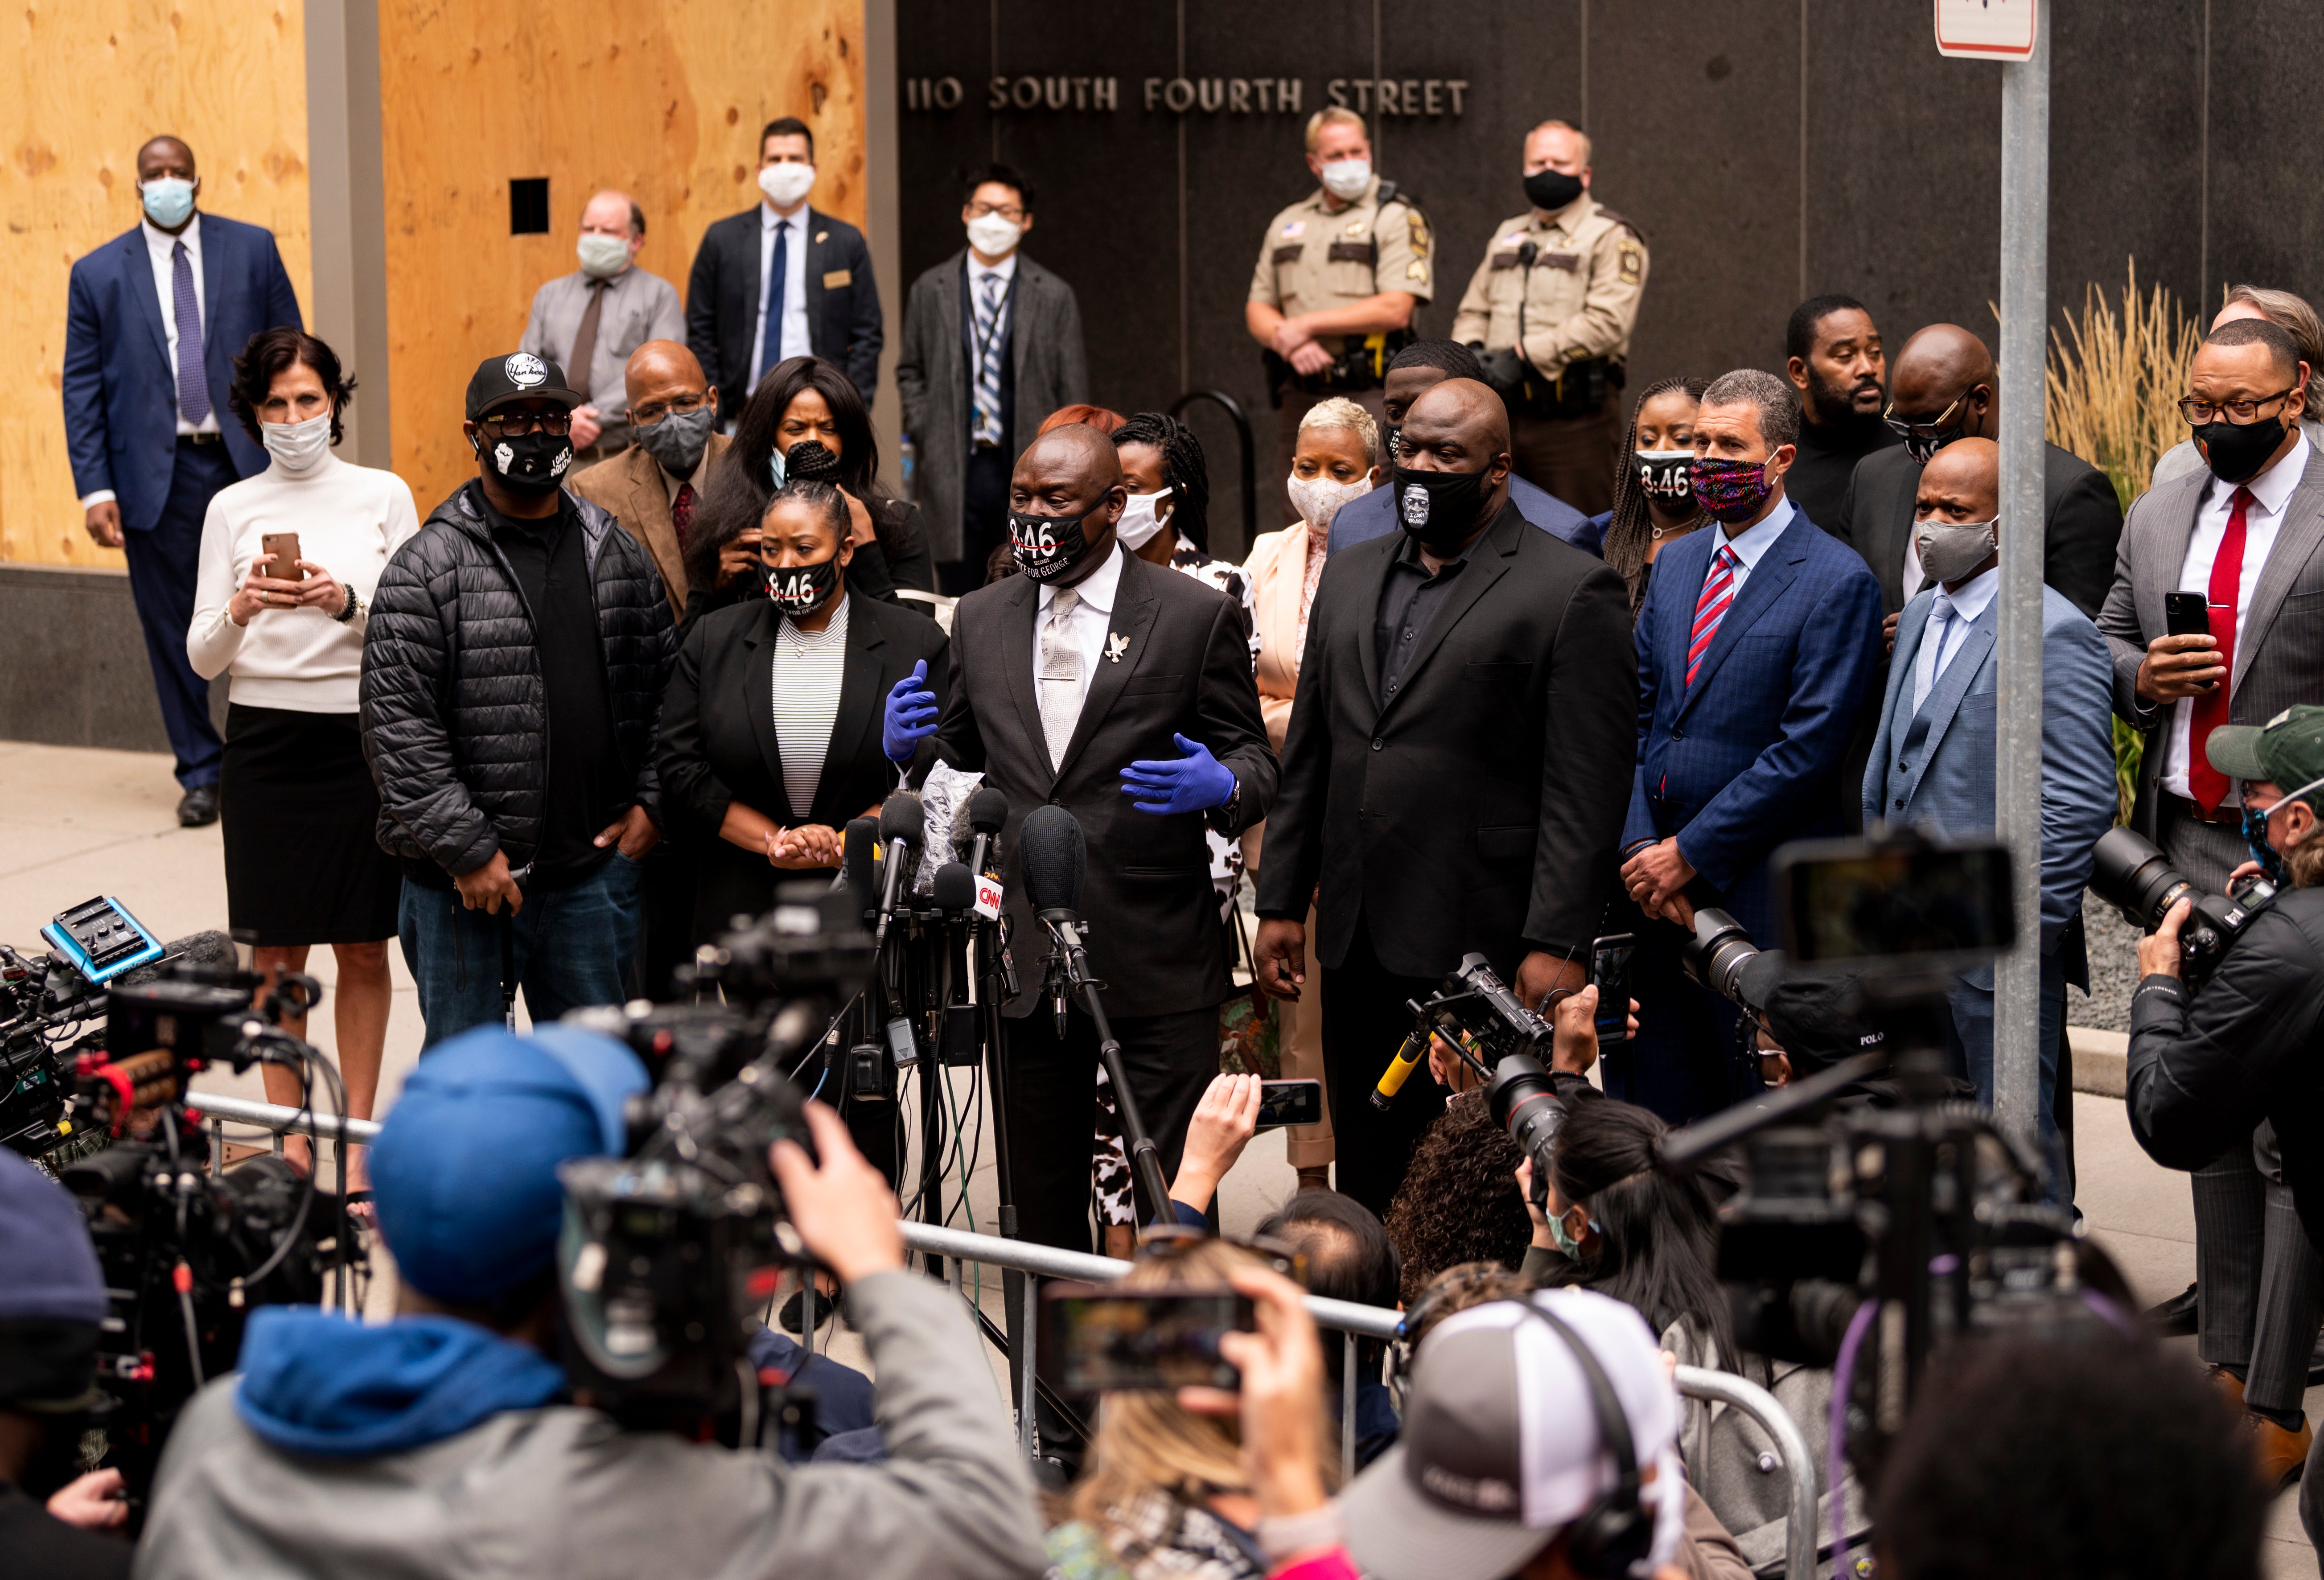 MINNEAPOLIS, MN - SEPTEMBER 11: Attorney Ben Crump (C), surrounded by family of George Floyd, speaks to media gathered outside the Hennepin County Family Justice Center after a pretrial hearing for the four former Minneapolis Police officers charged in the death of George Floyd on September 11, 2020 in Minneapolis, Minnesota. Crump is representing George Floyd's family.